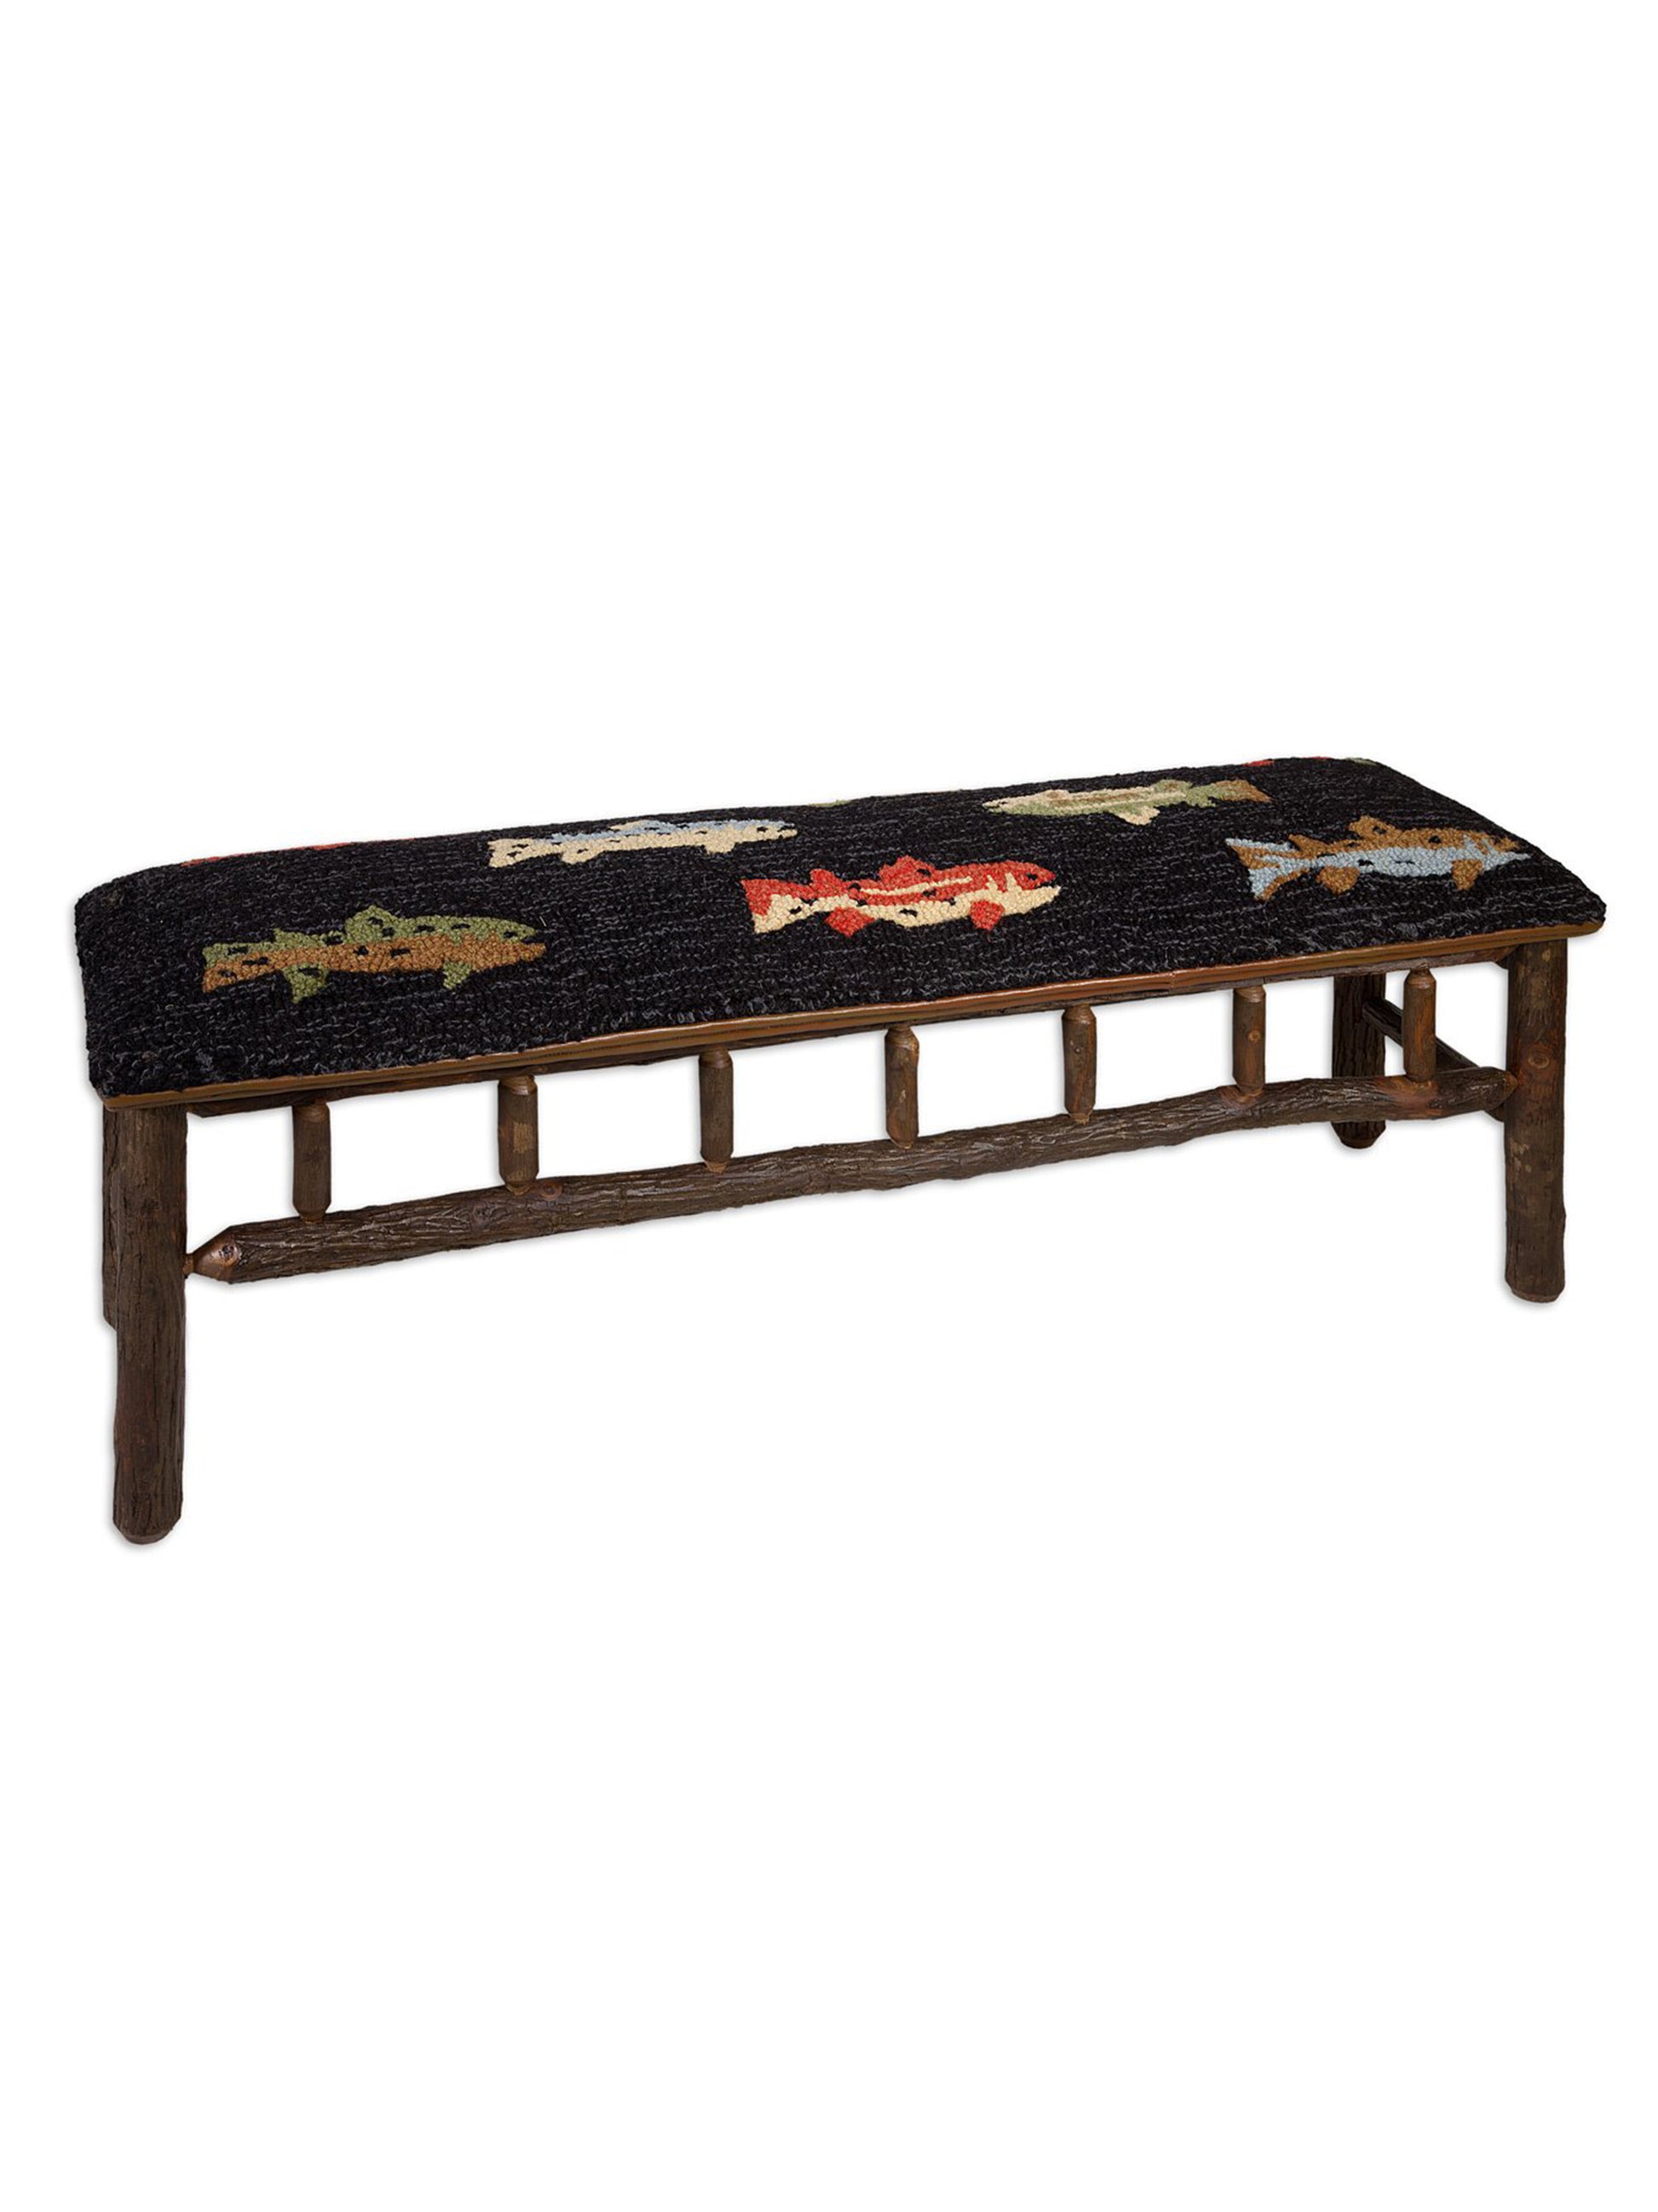 River Fish Hooked Wool Top Bench 15" x 48" Weston Table